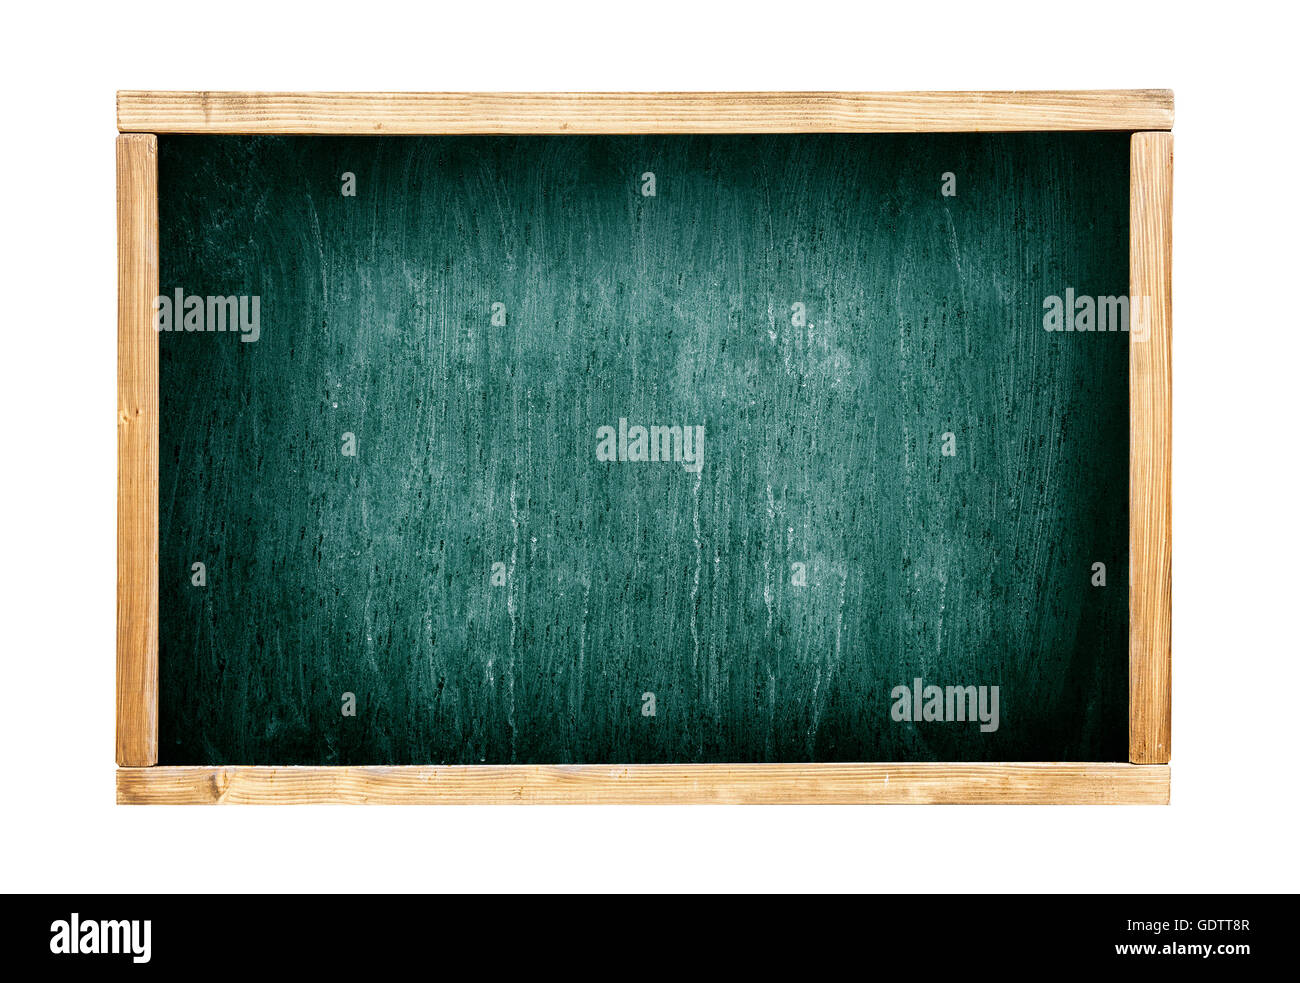 Black chalk board texture background. Chalkboard, blackboard, school board  surface with scratches and chalk traces. Wide banner. Stock Photo